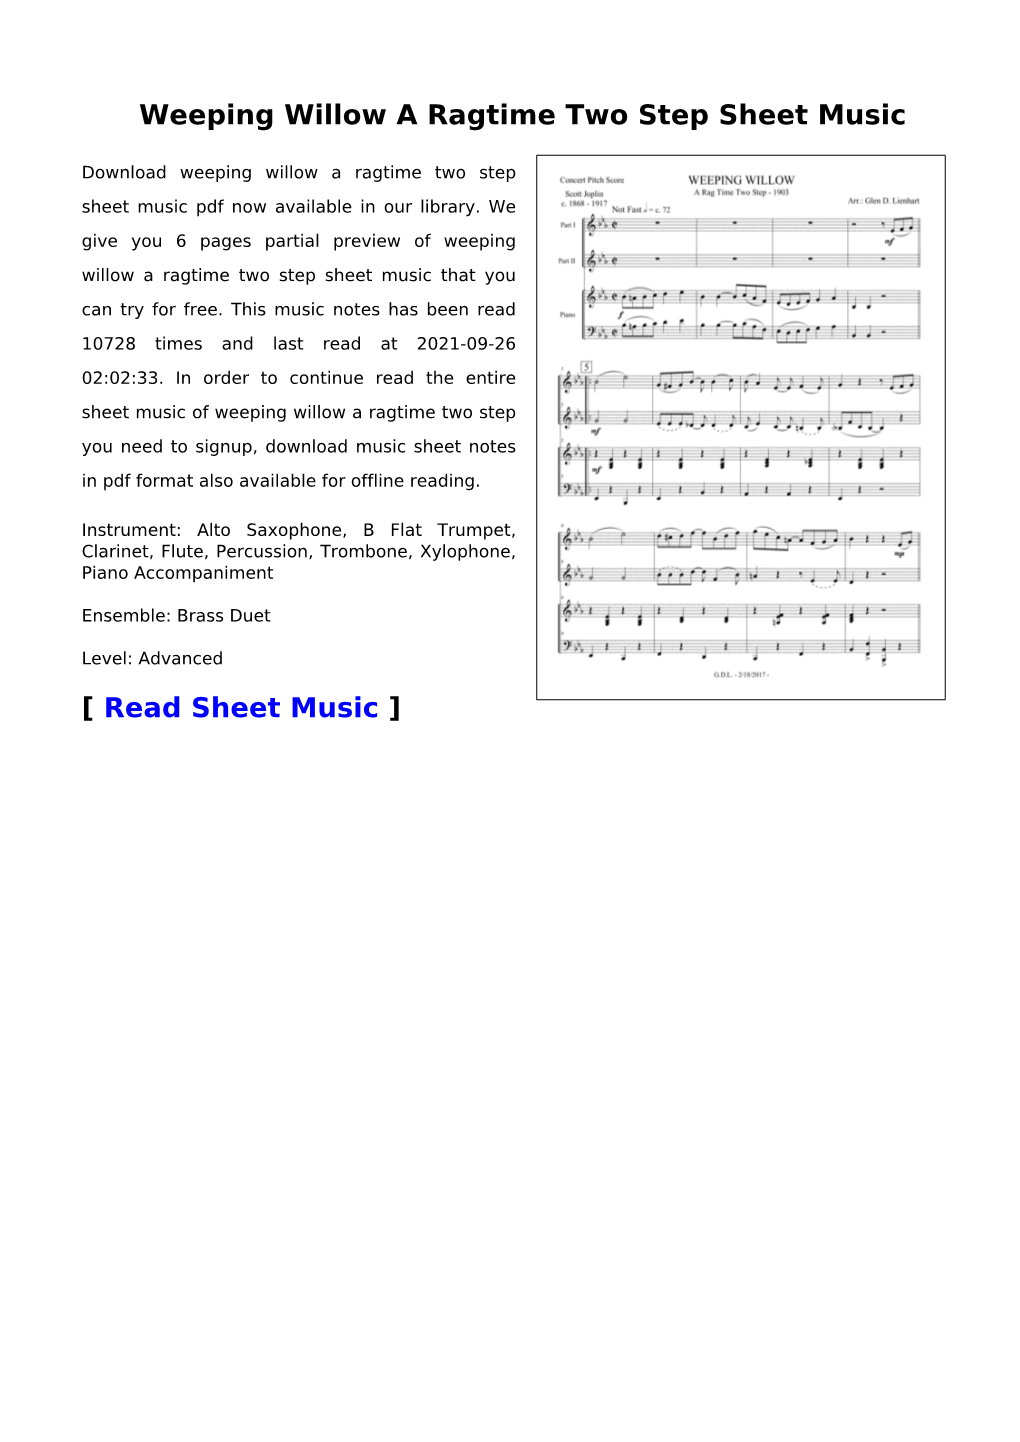 Weeping Willow a Ragtime Two Step Sheet Music